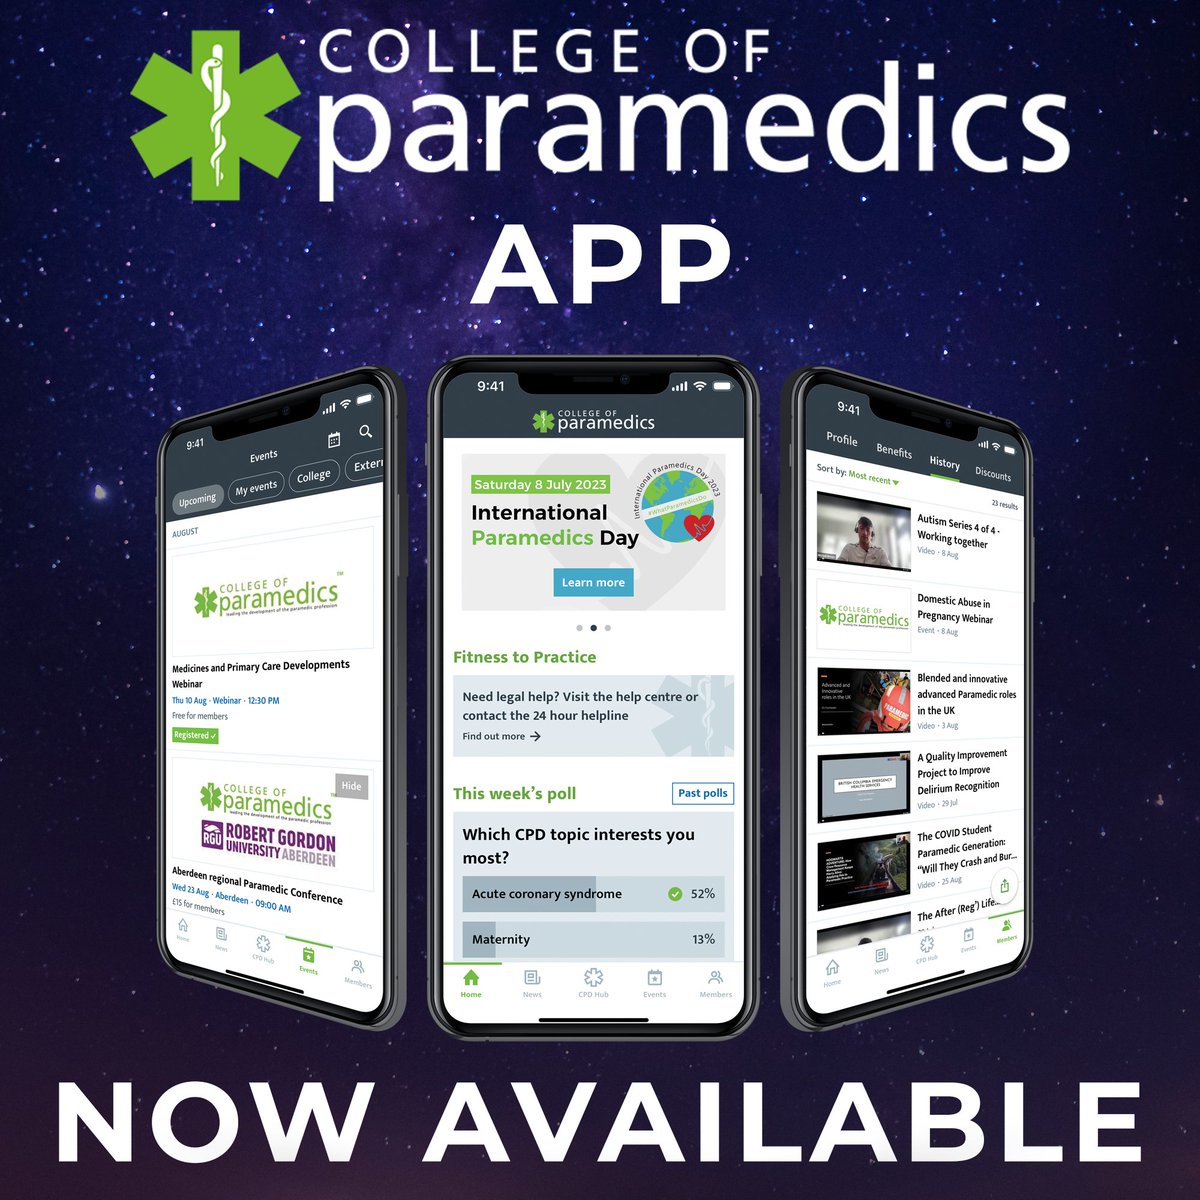 The College of Paramedics App is now available! 🙌 An essential resource on-the-go! All our members have free full access to the App. Read more and download here 👉 bit.ly/3V3kYRd #ParamedicsUK #CoPApp